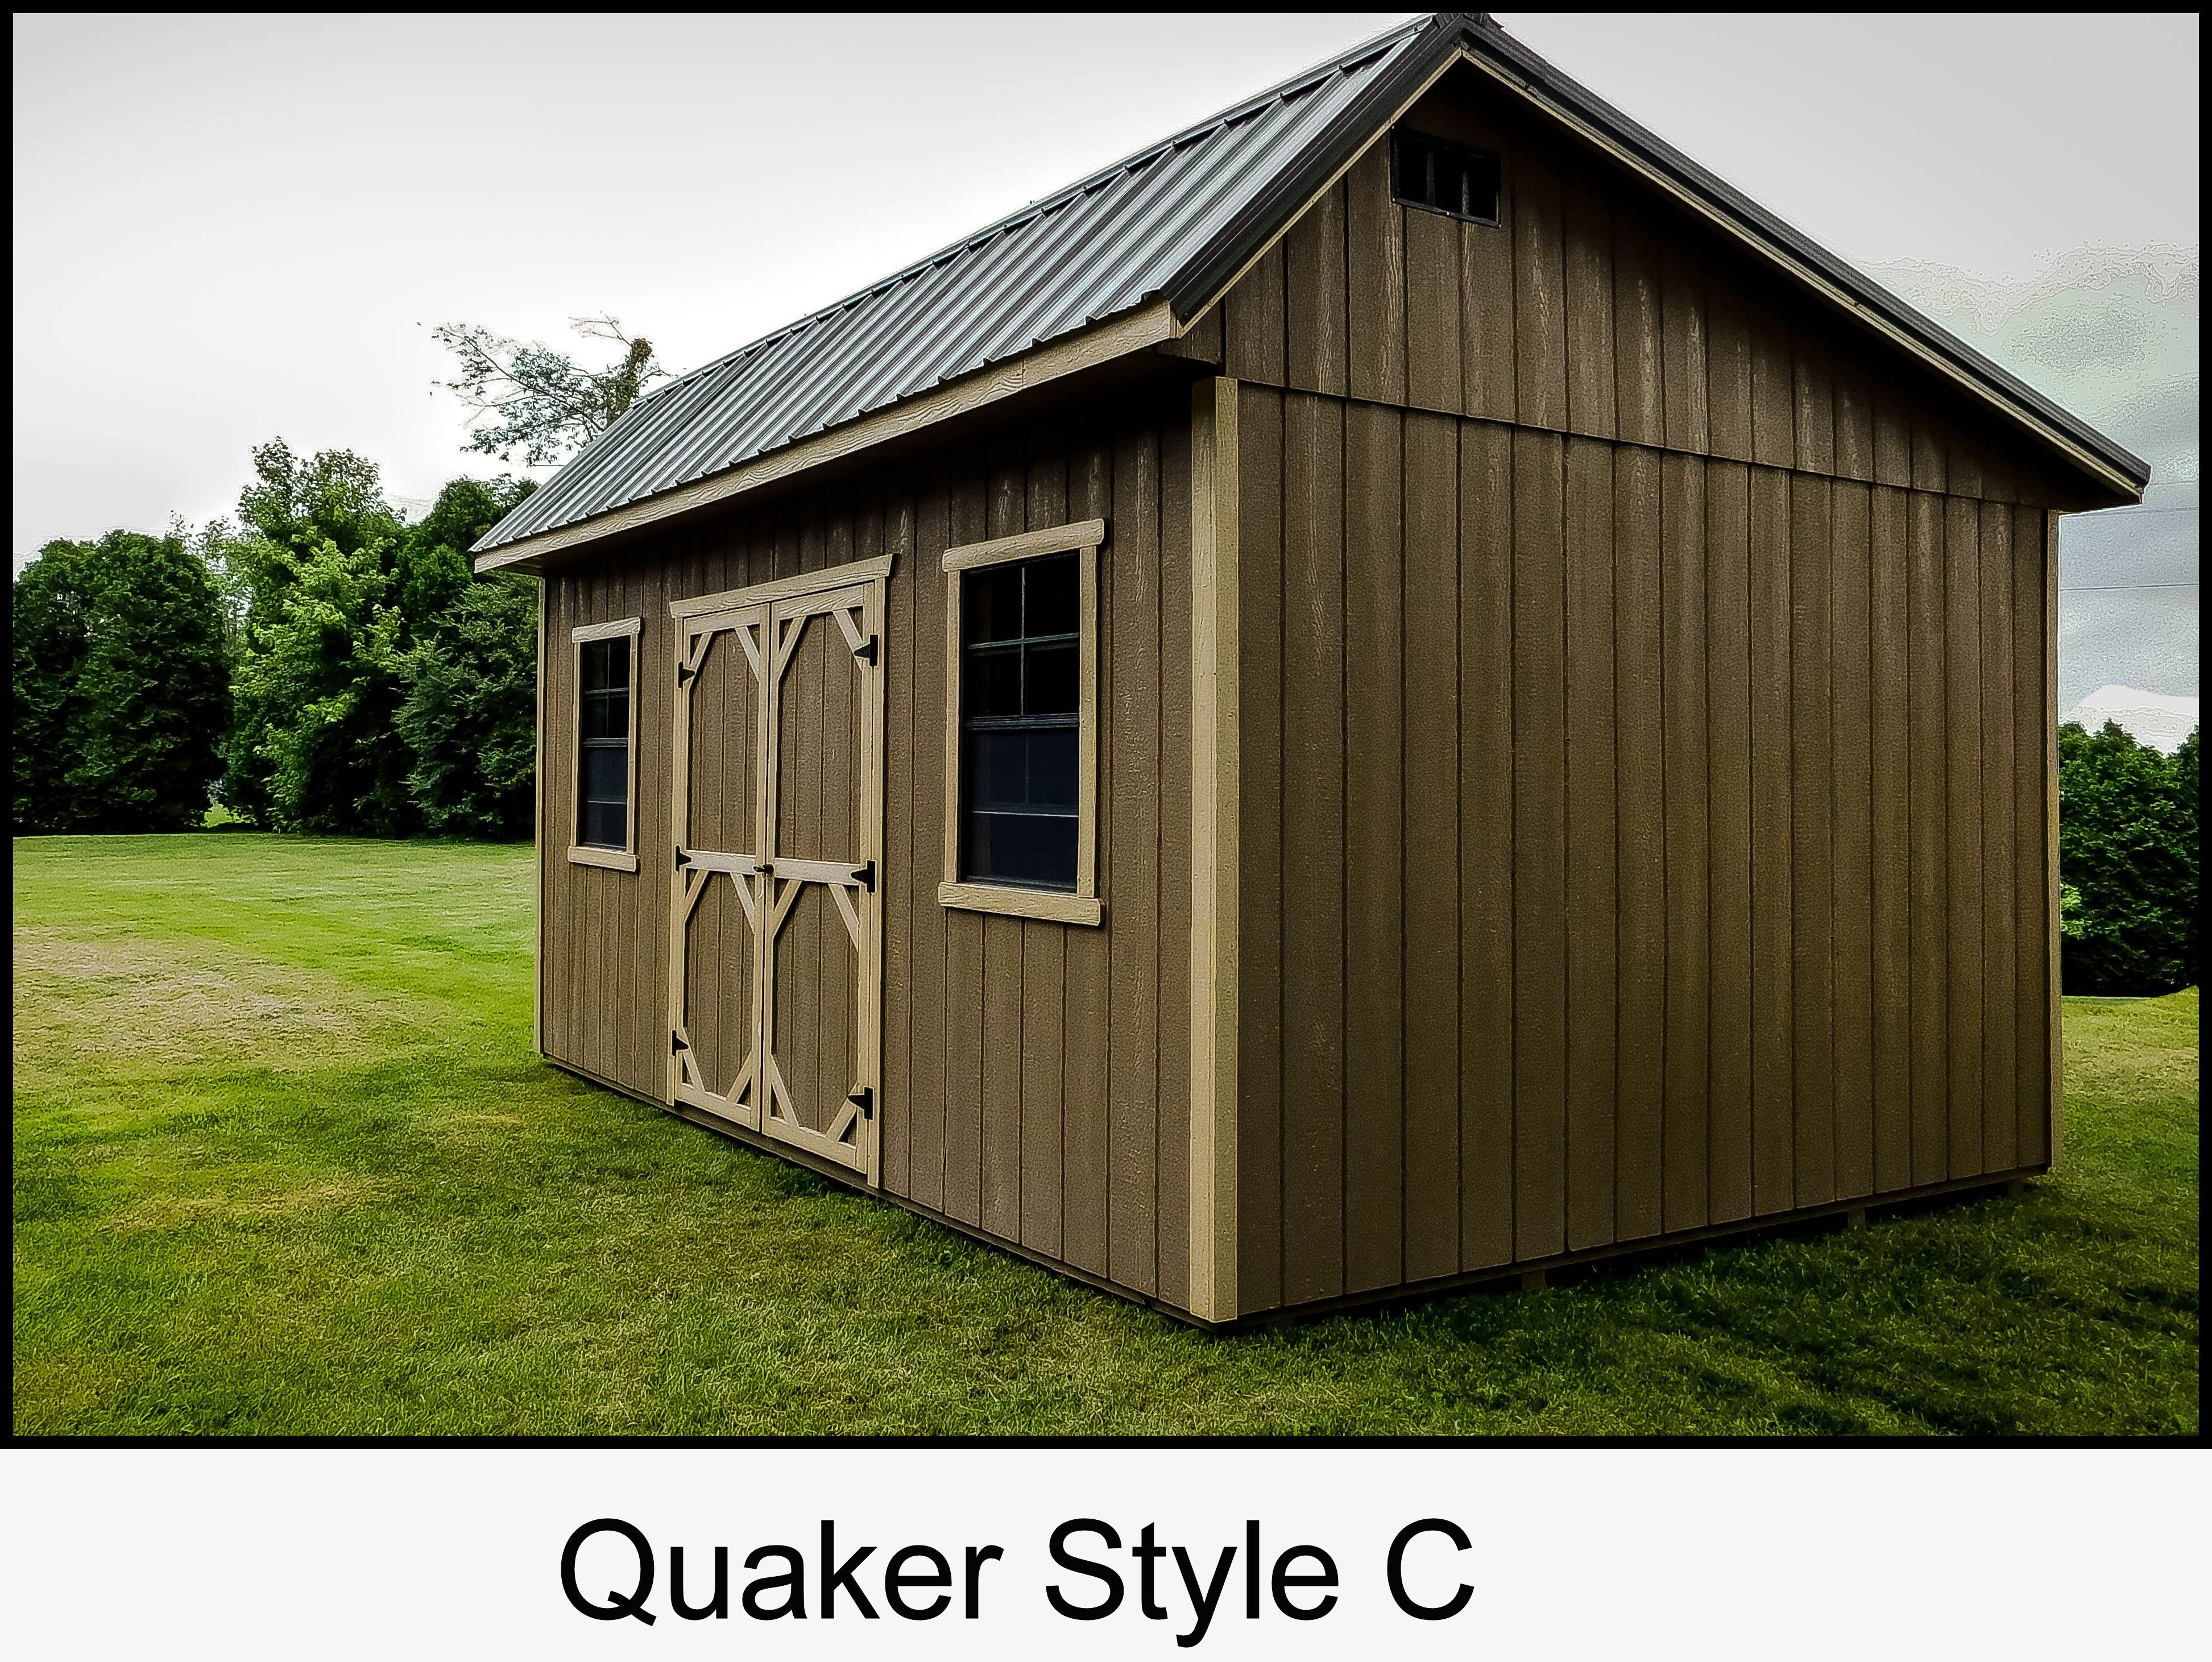 Rent To Own Storage Buildings, Sheds, Barns, Lawn Furniture ...